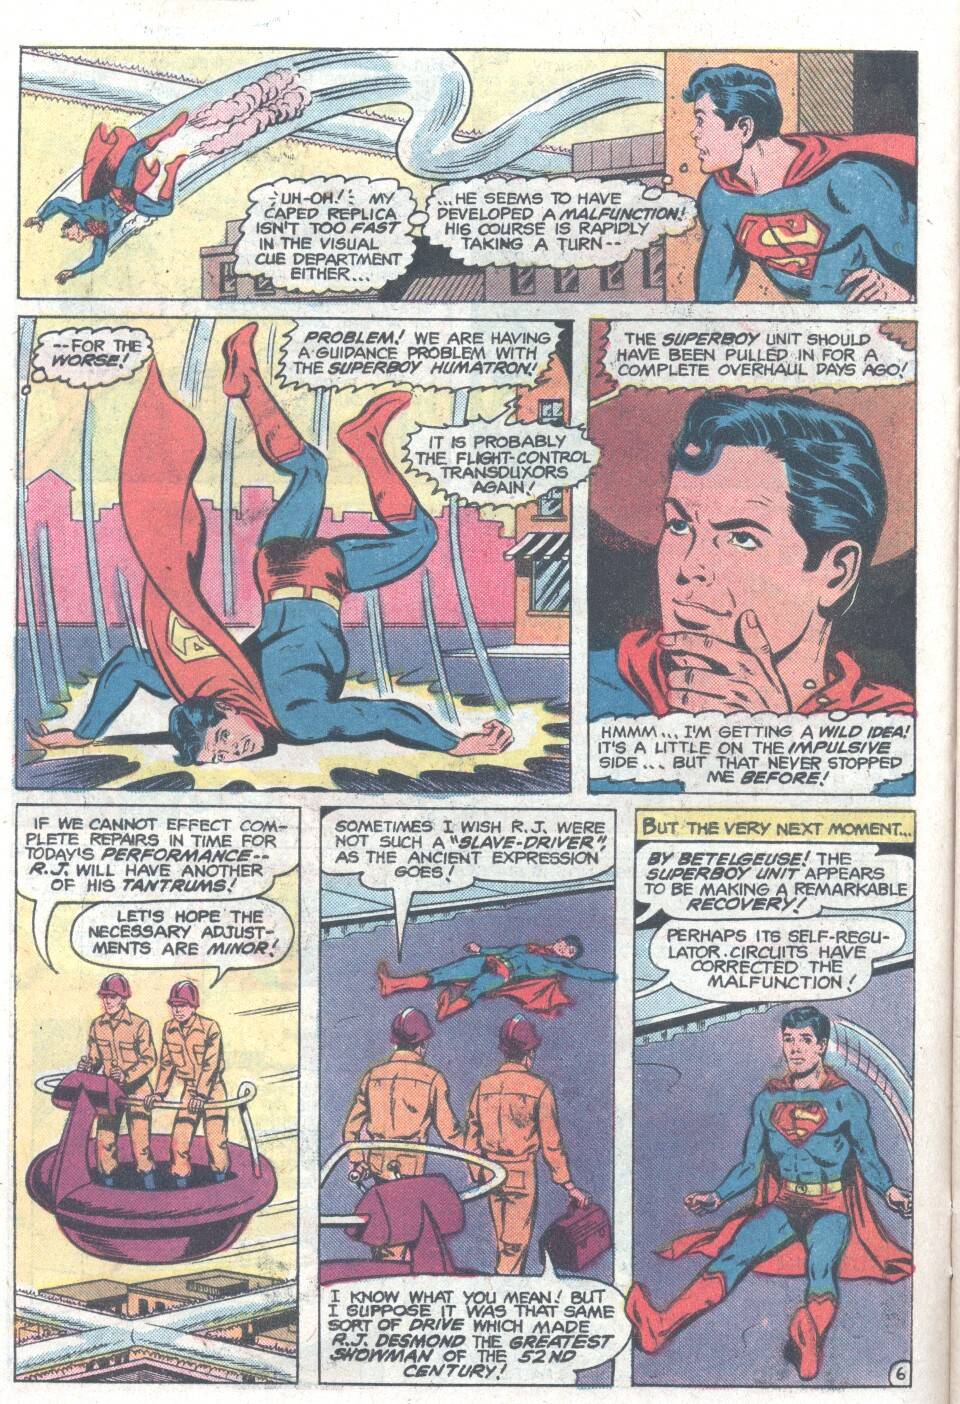 The New Adventures of Superboy 10 Page 6